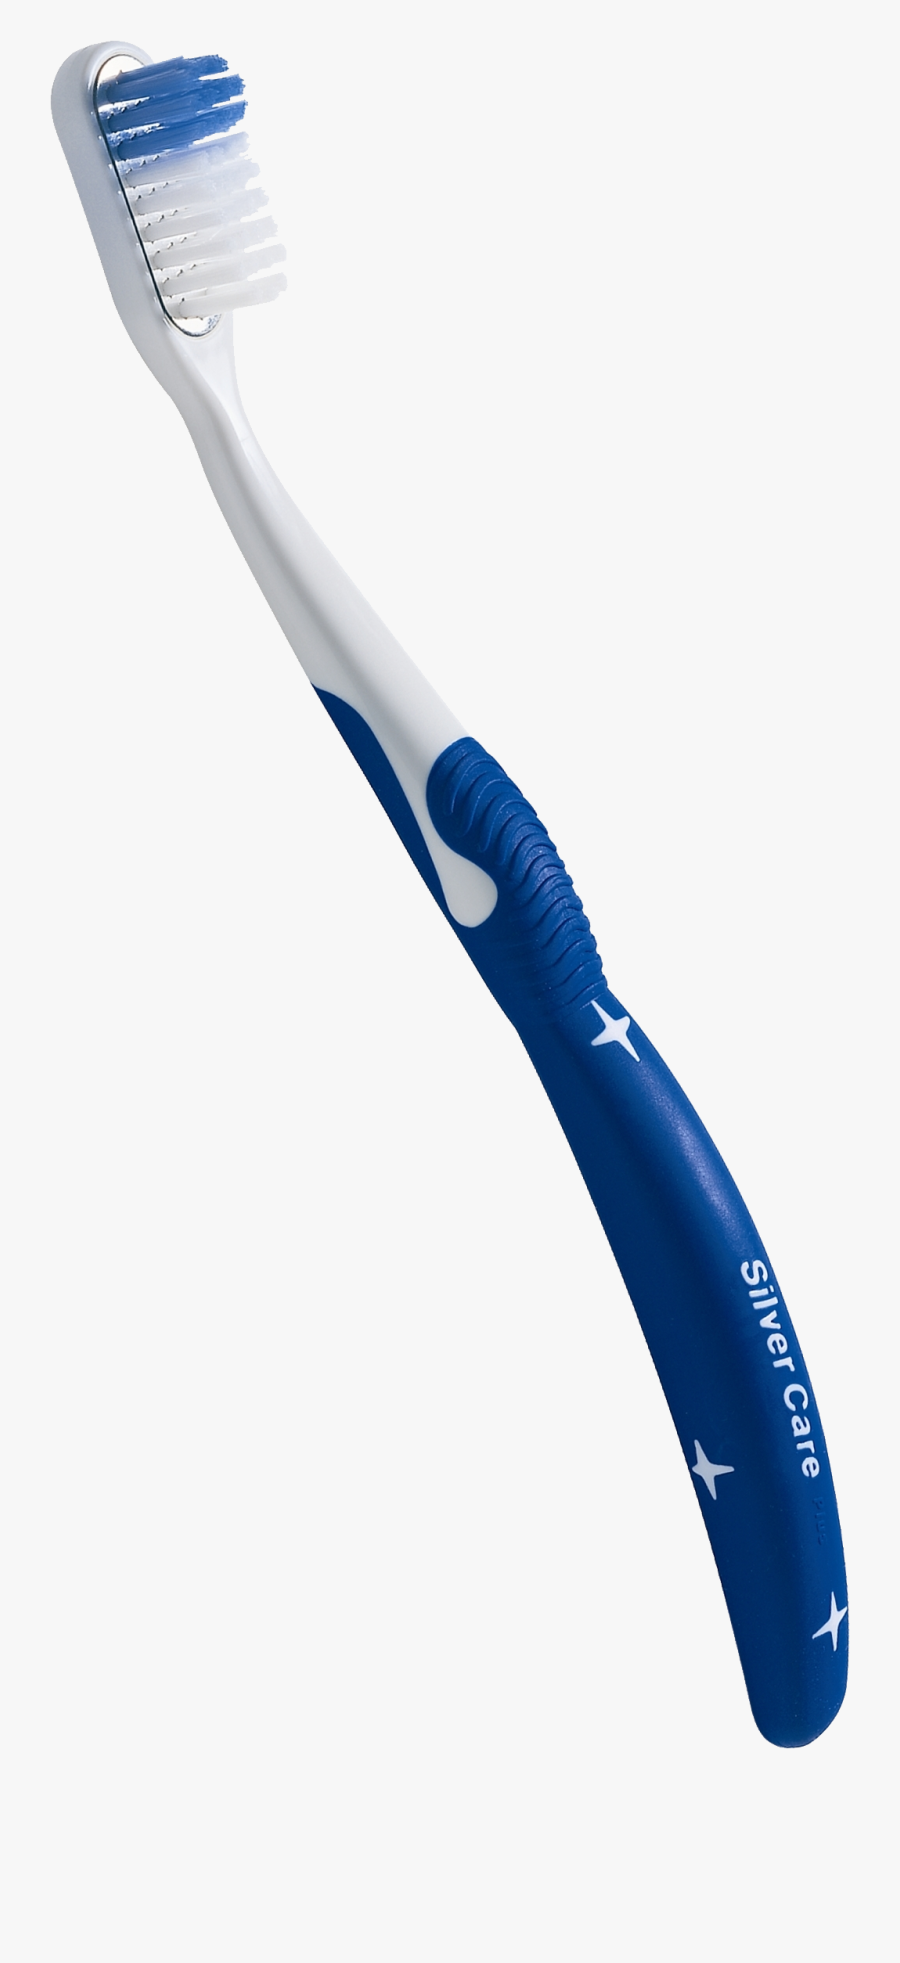 Blue White Toothbrush Png Image - Toothbrush, Transparent Clipart